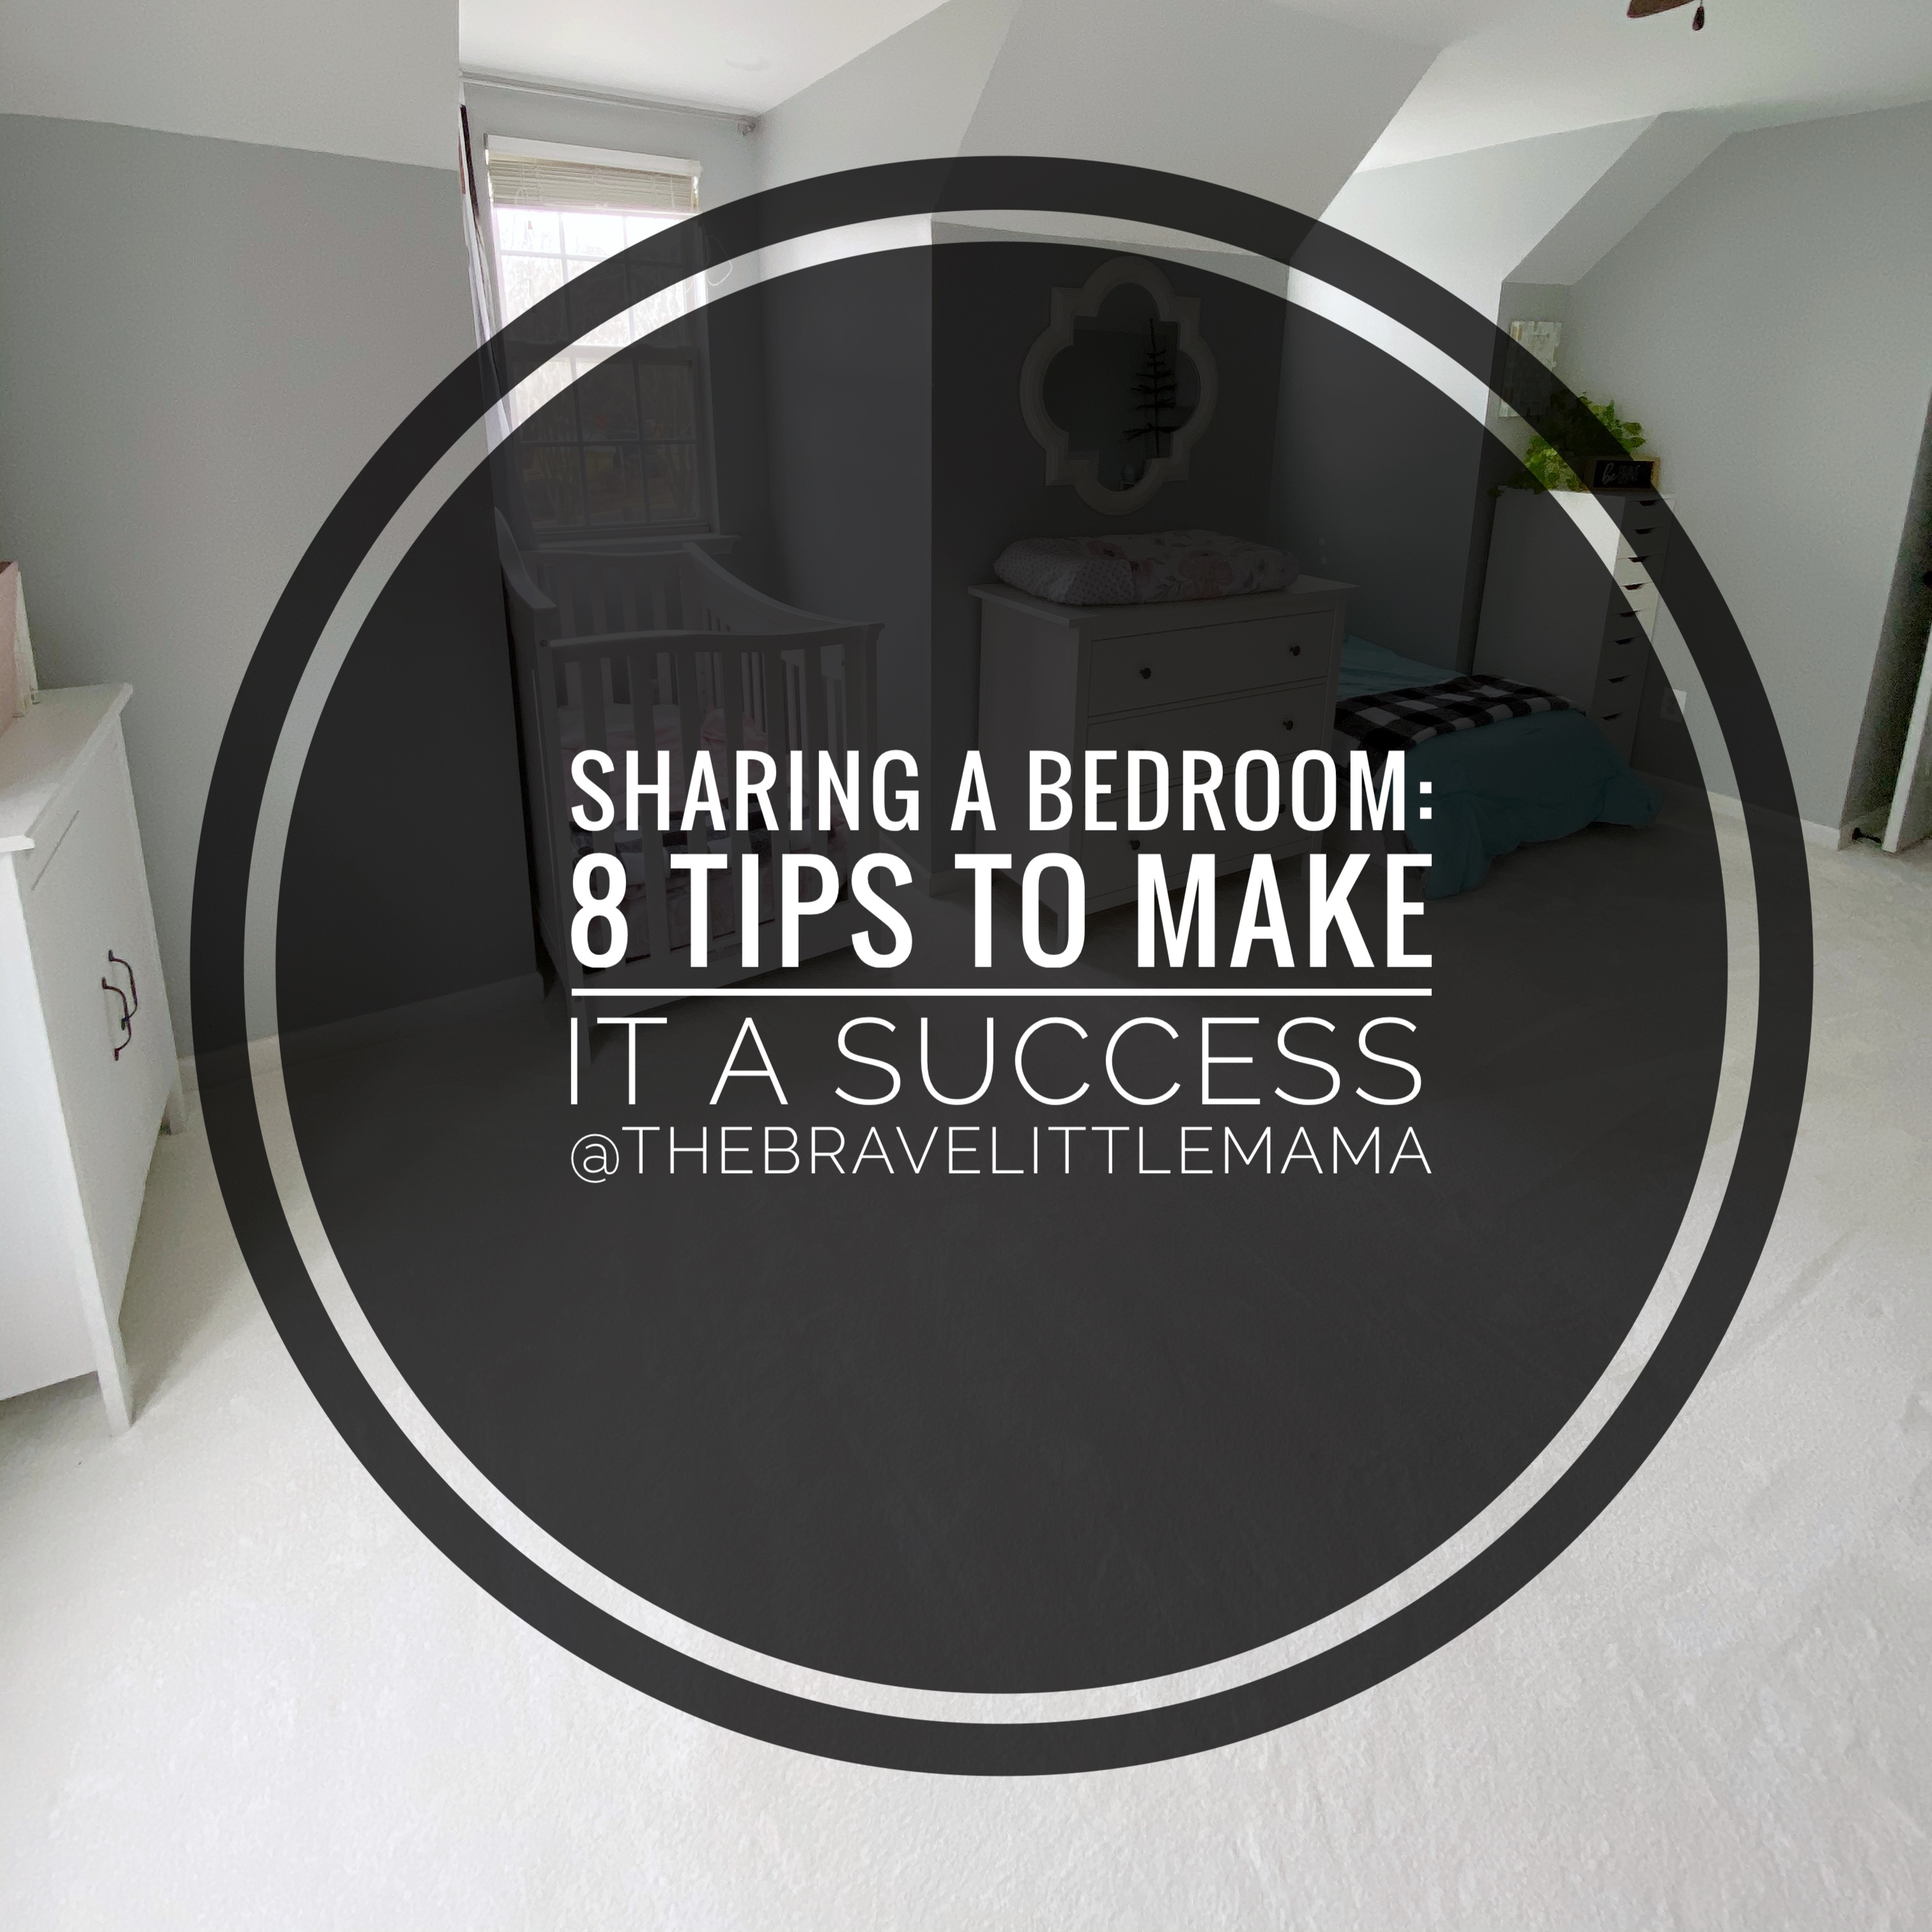 Sharing a Bedroom: 8 Tips to Make it a Success